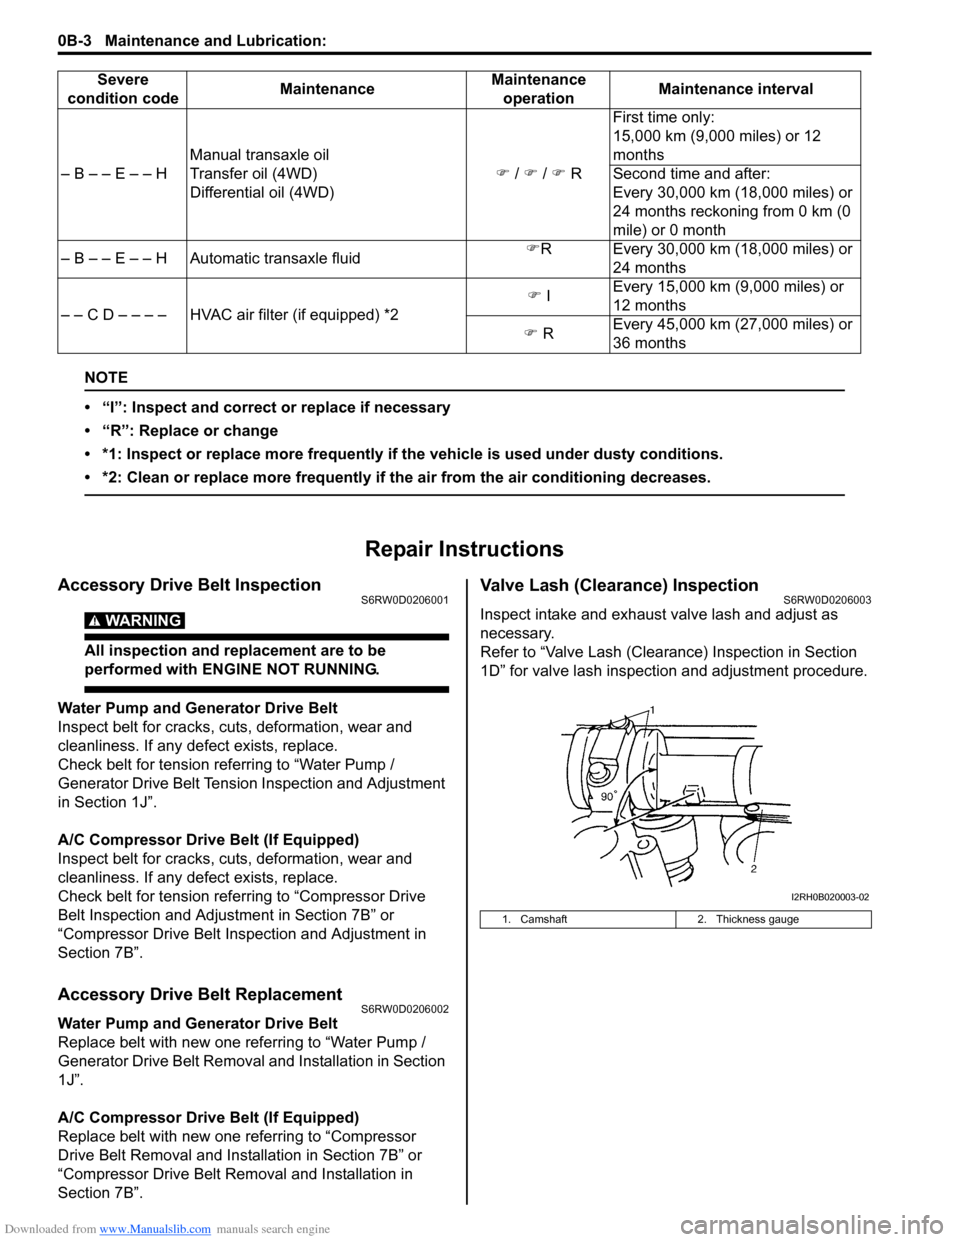 SUZUKI SX4 2006 1.G Service User Guide Downloaded from www.Manualslib.com manuals search engine 0B-3 Maintenance and Lubrication: 
NOTE
• “I”: Inspect and correct or replace if necessary
• “R”: Replace or change
• *1: Inspect